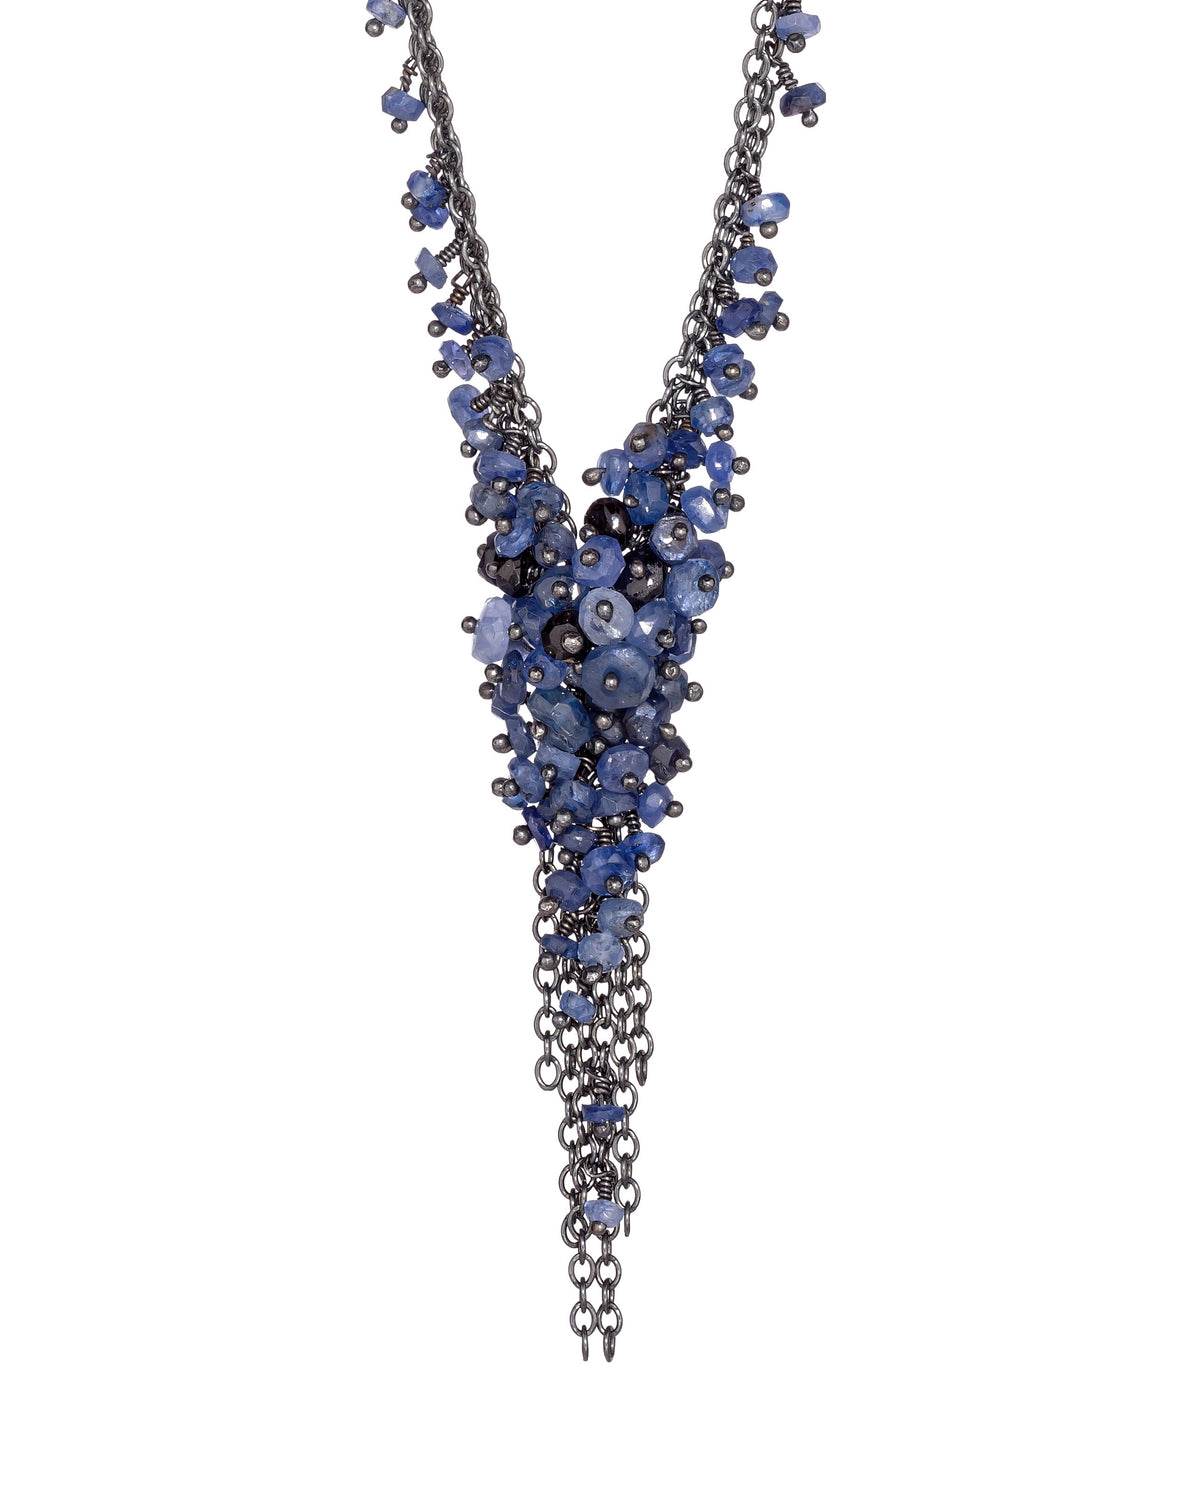 Sapphire and Oxidised Silver ‘V’ Tassel Necklace - IndependentBoutique.com